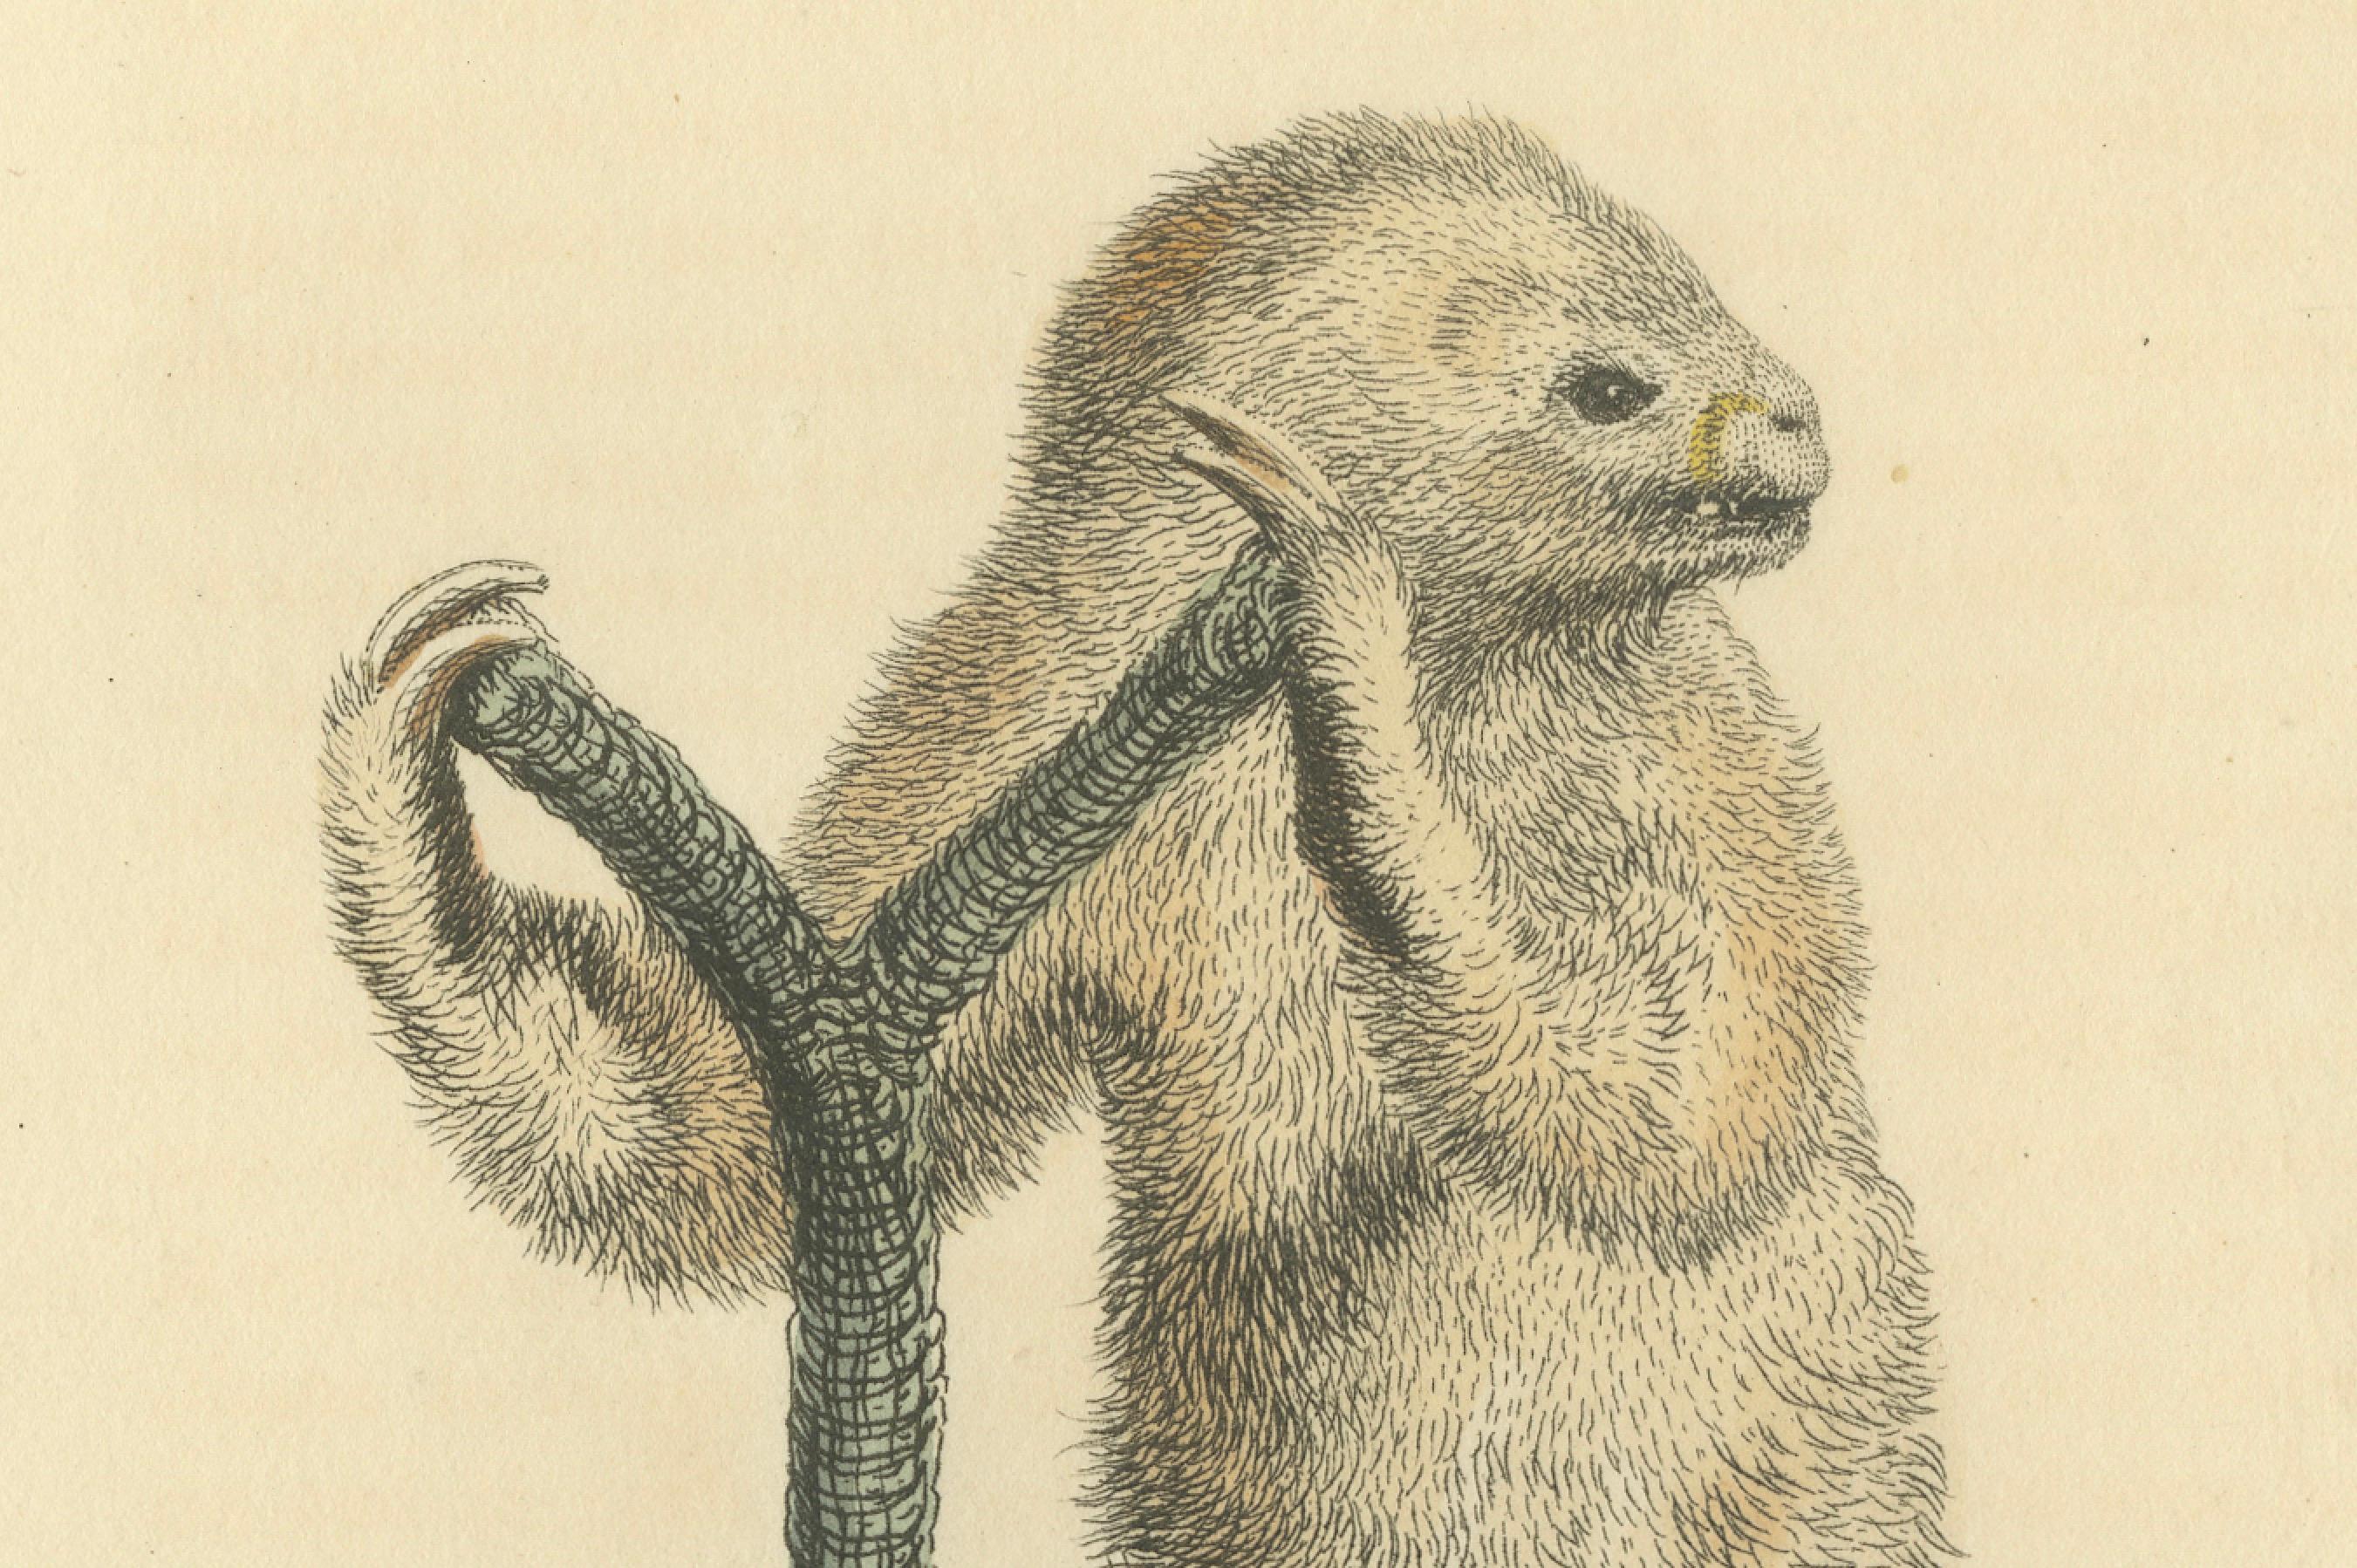 A vintage depiction of Linnaeus's two-toed sloth, labeled as 